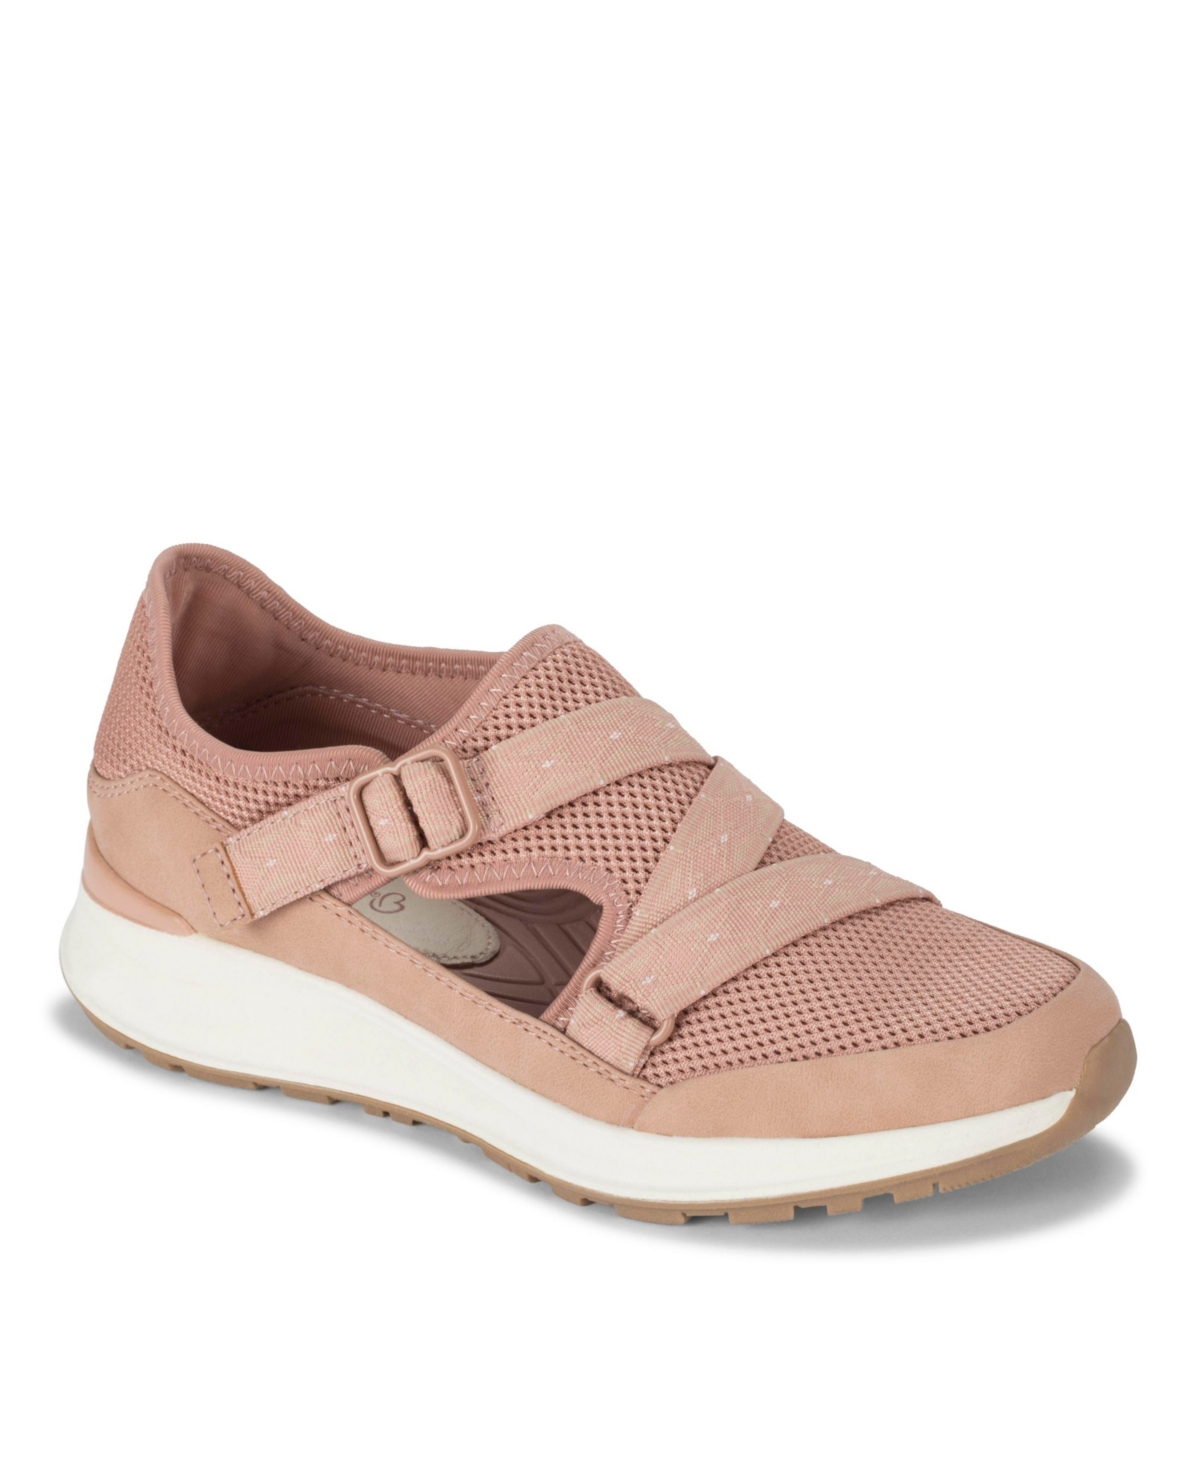 Women's Bianna Casual Slip On Sneakers - Soft Pink